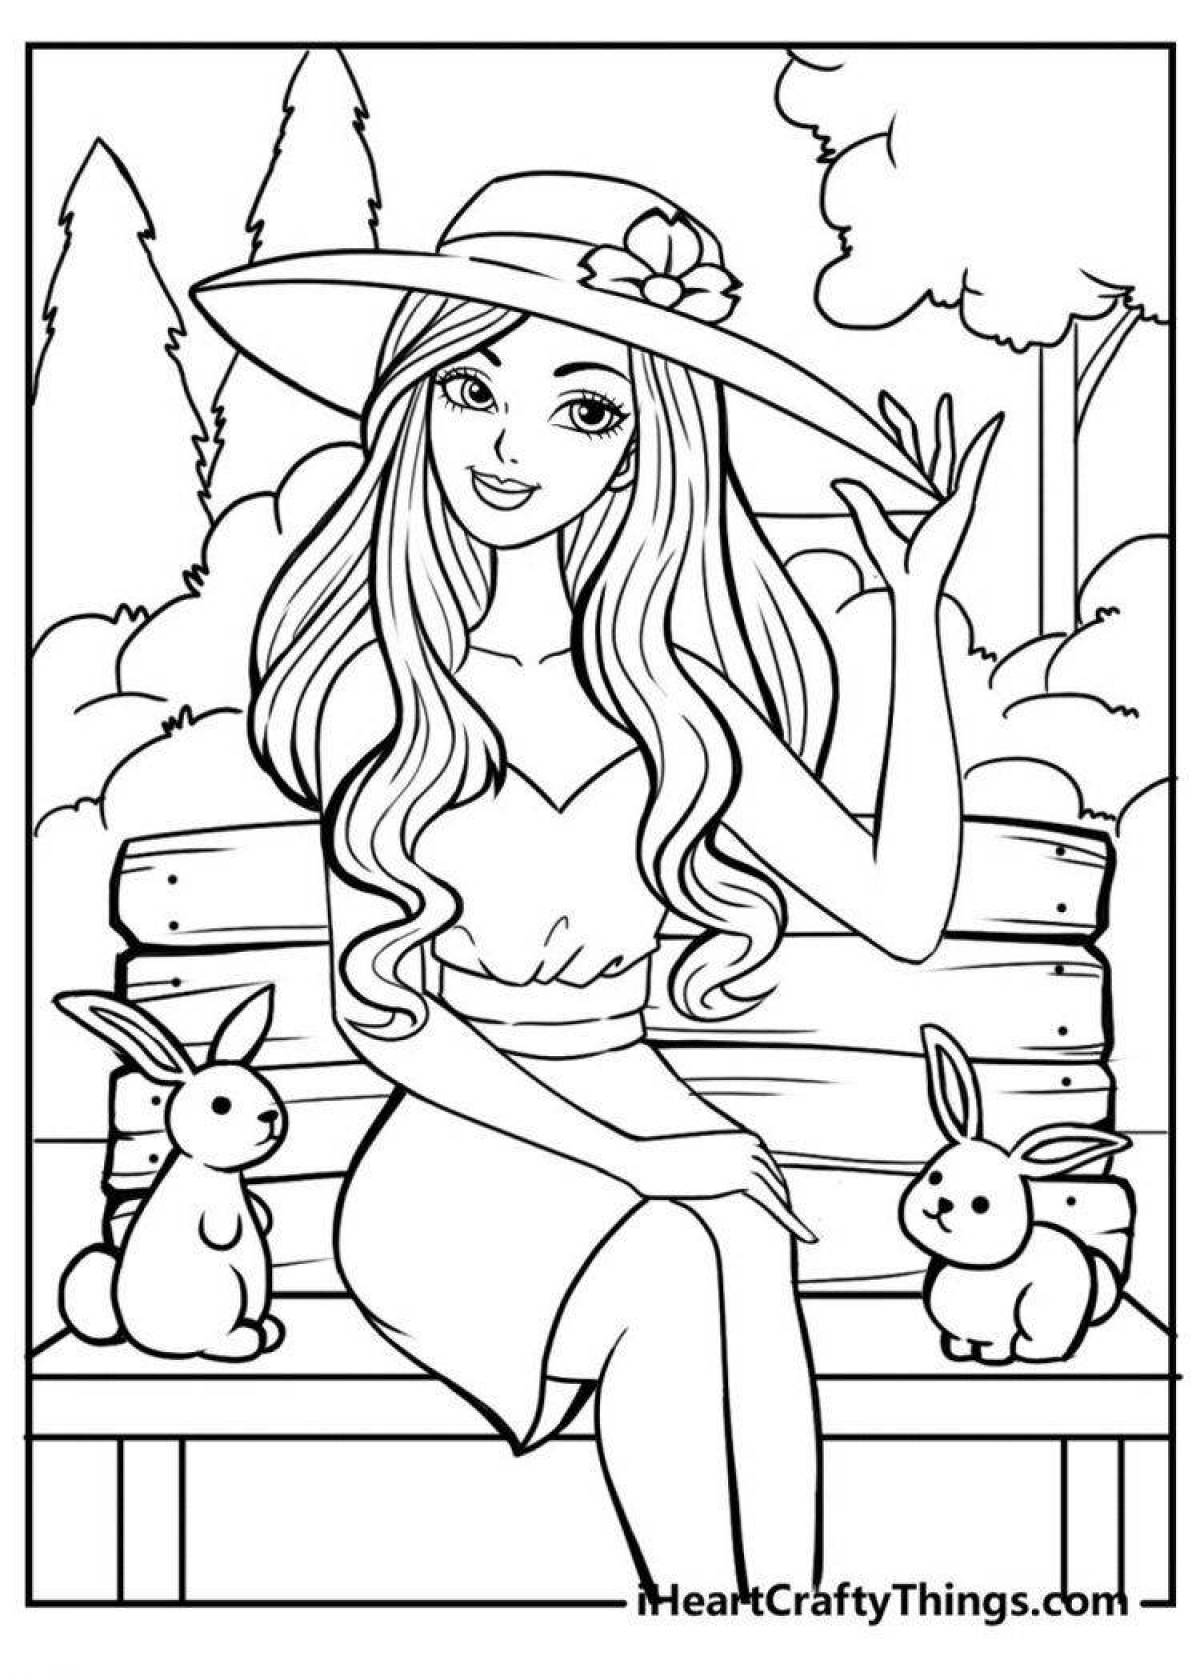 Animated barbie coloring book for kids